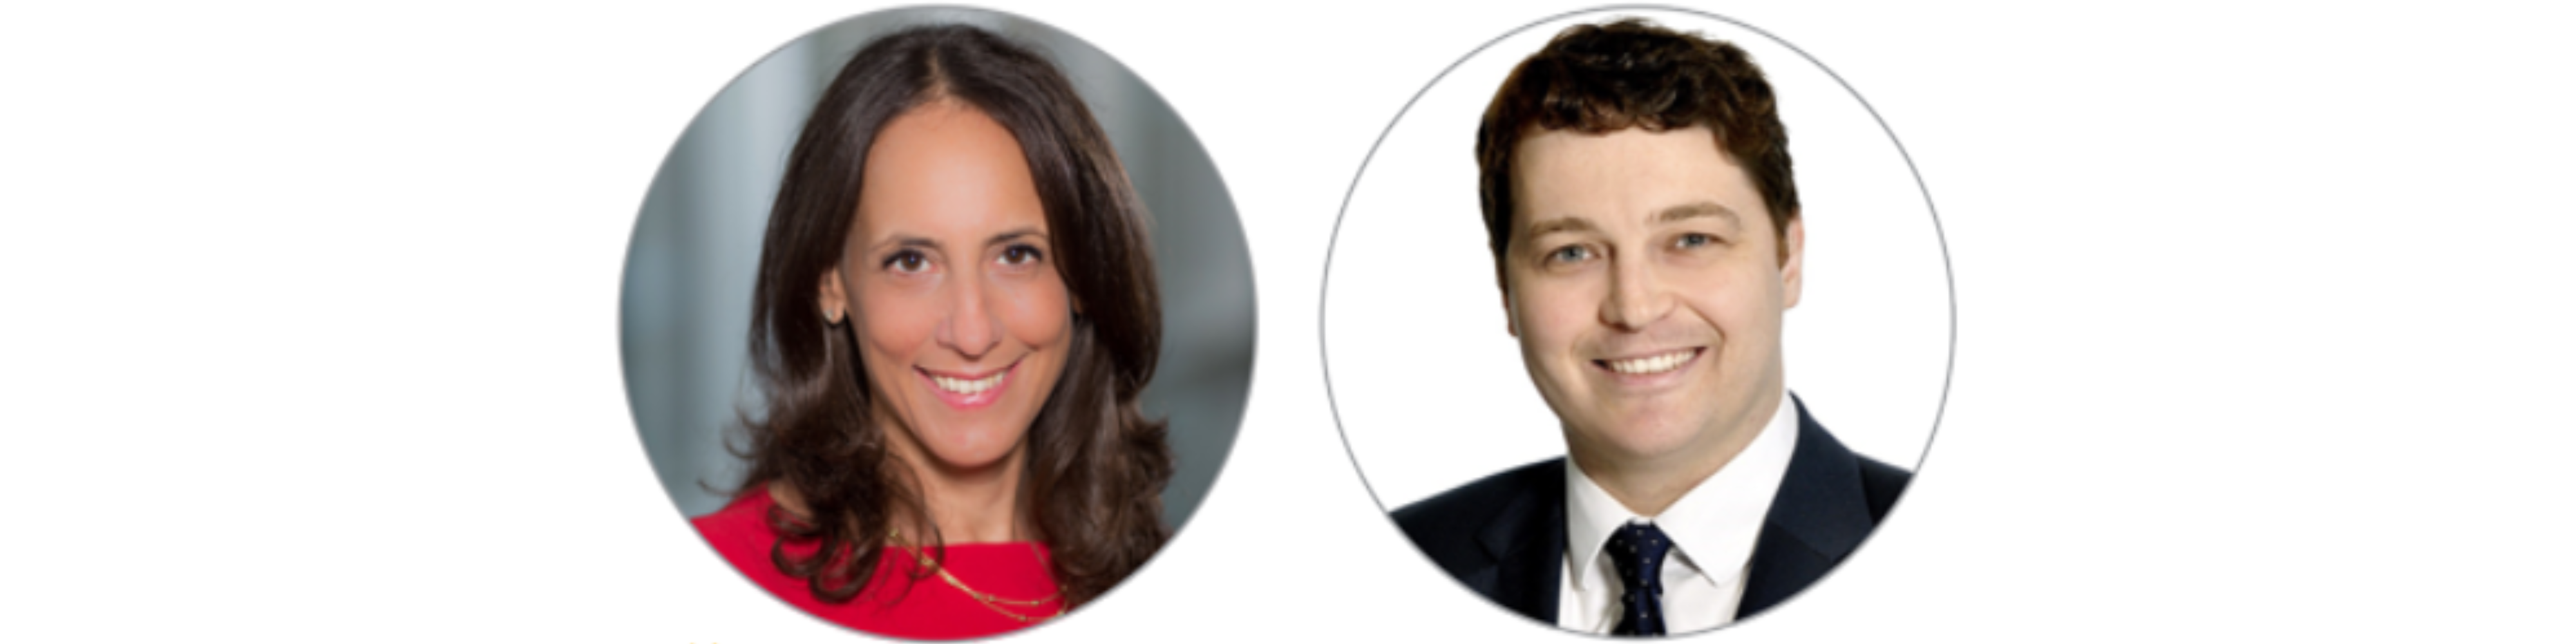 Headshot photos of Sloane Litchen, general counsel at Sun Life Canada, and Jacob Posen, general counsel with CBRE Investment Management